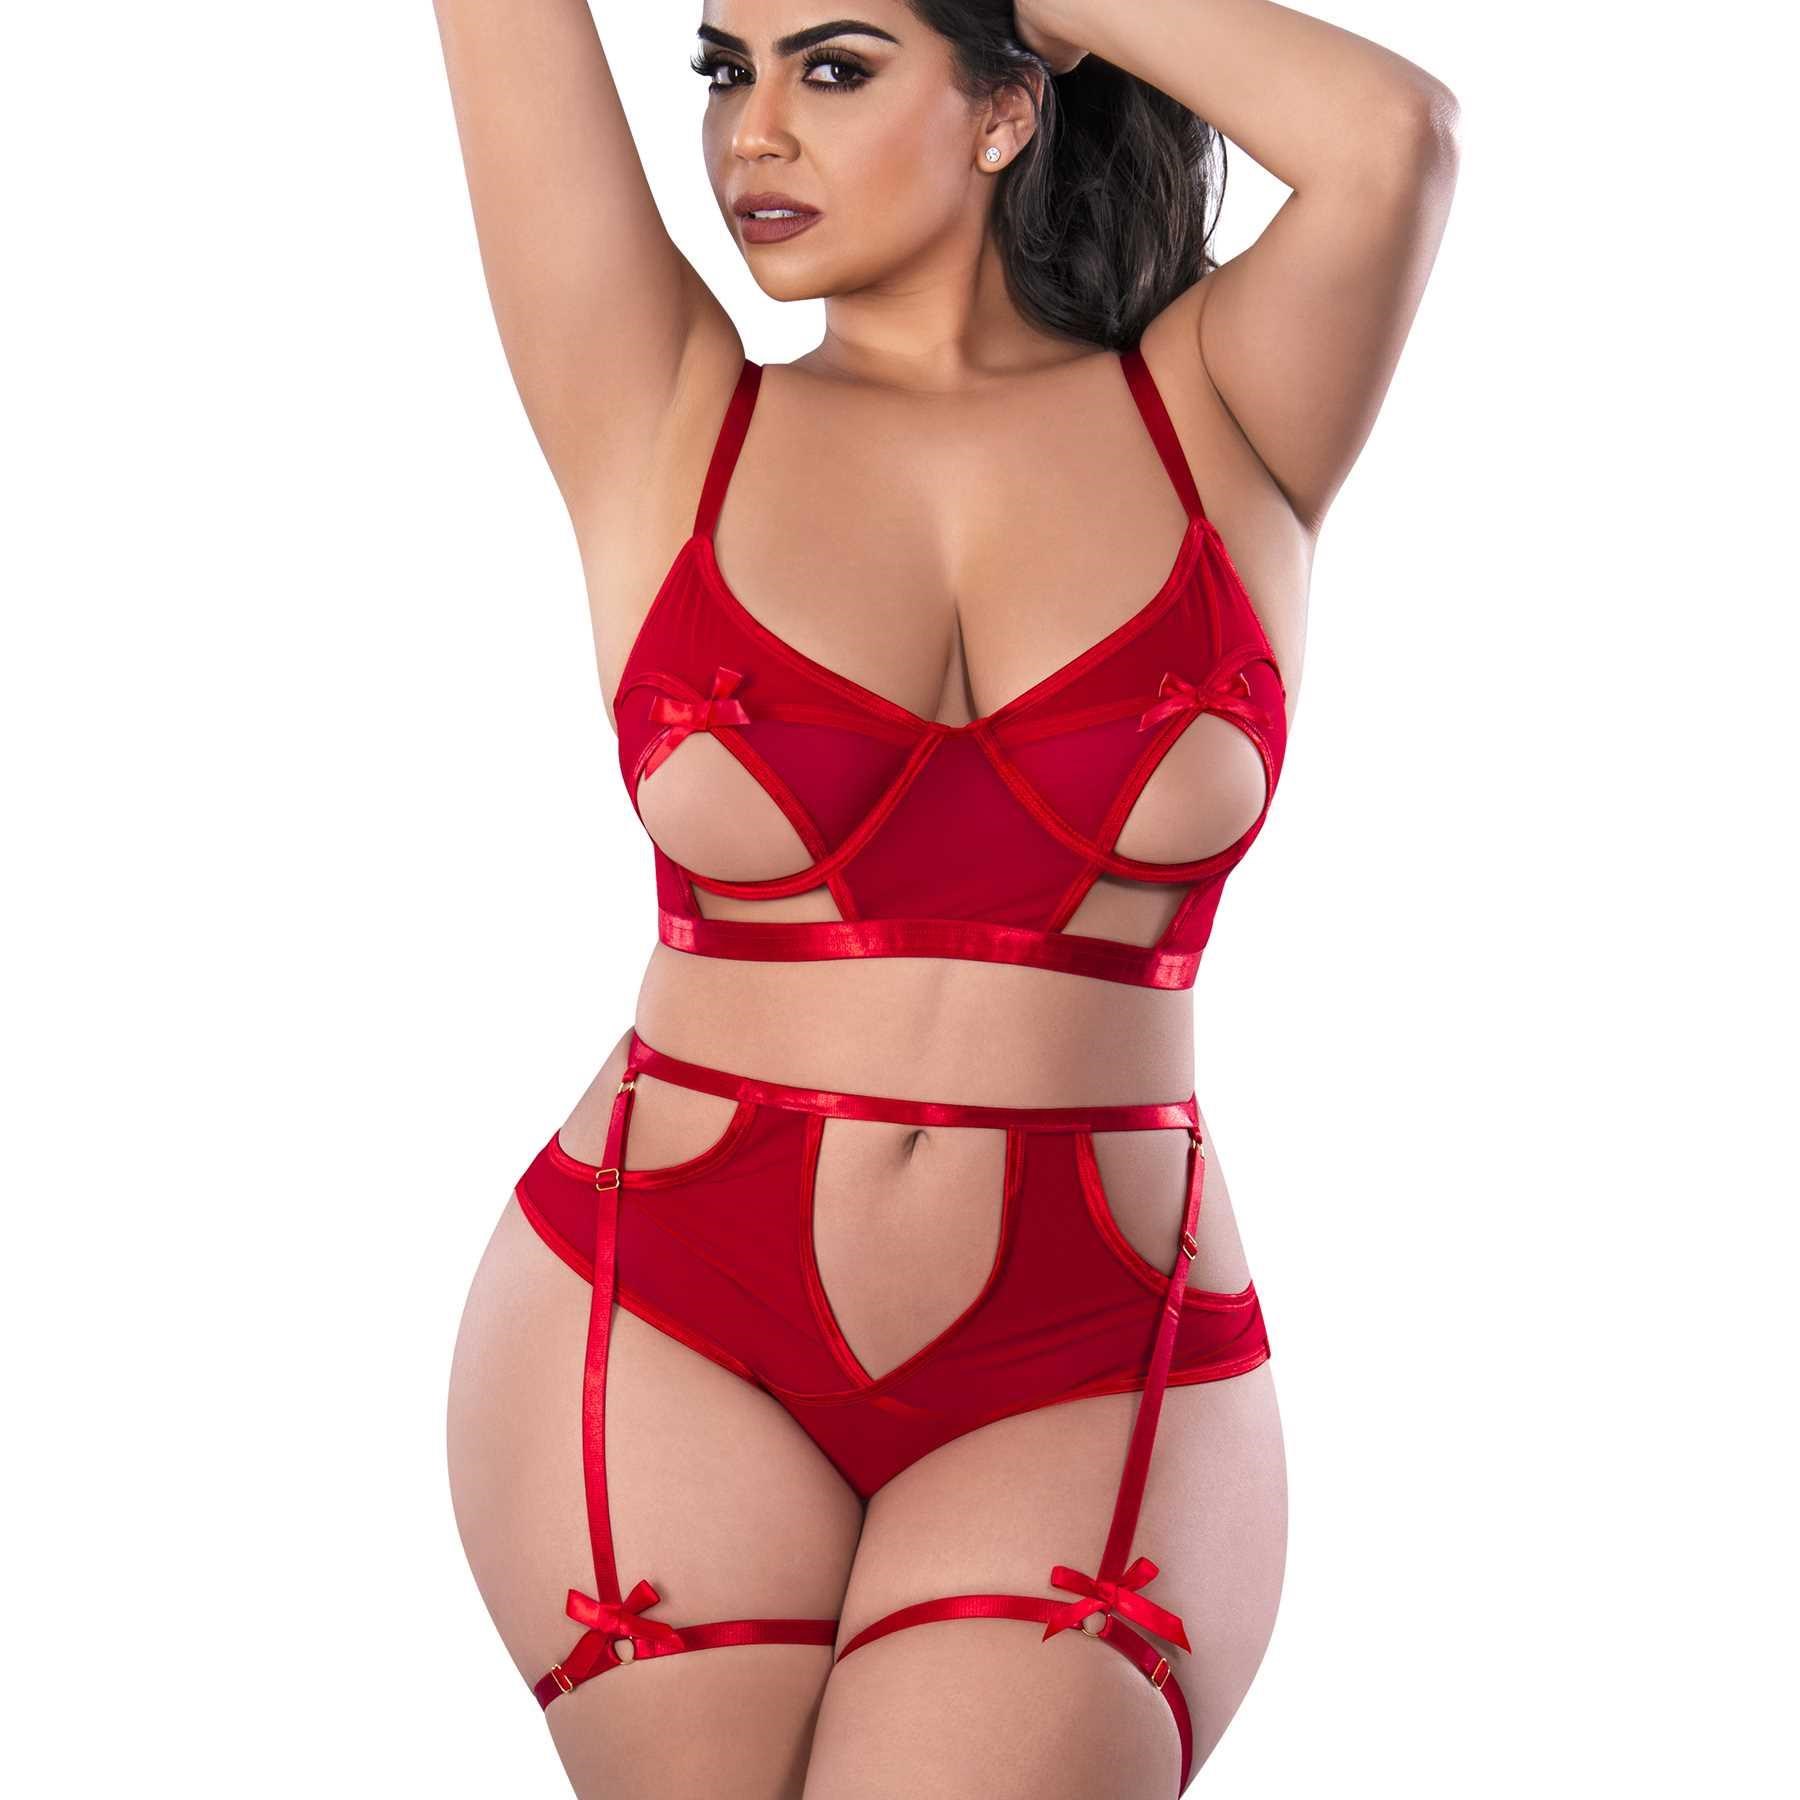 Holidaze bralette high waist panty set w/removable garters red front queen